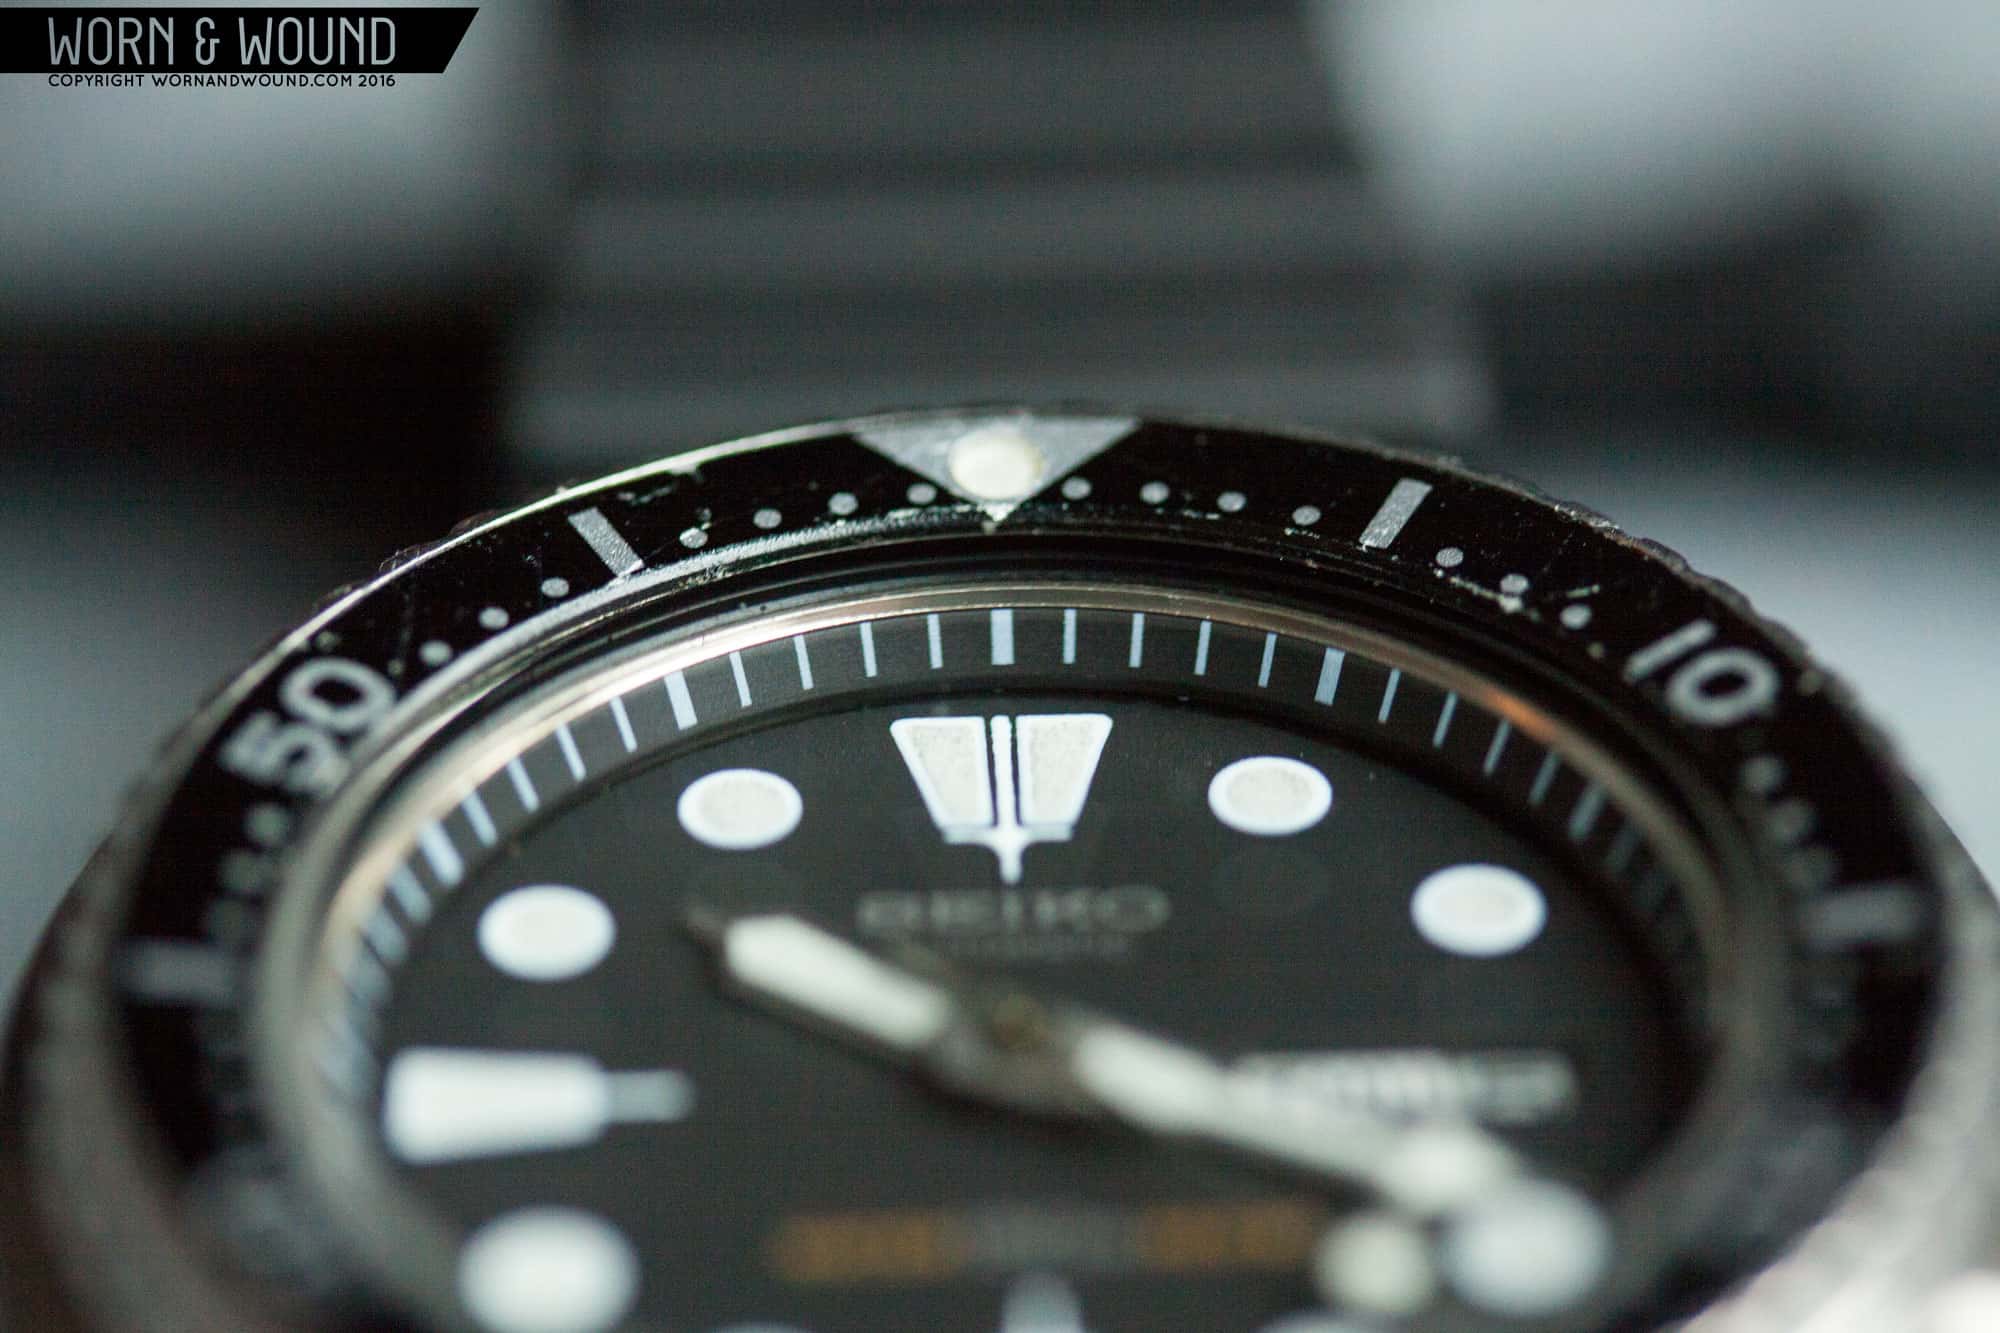 Turtle vs Turtle: Looking at the 6309 and the SRP77Xs - Worn & Wound